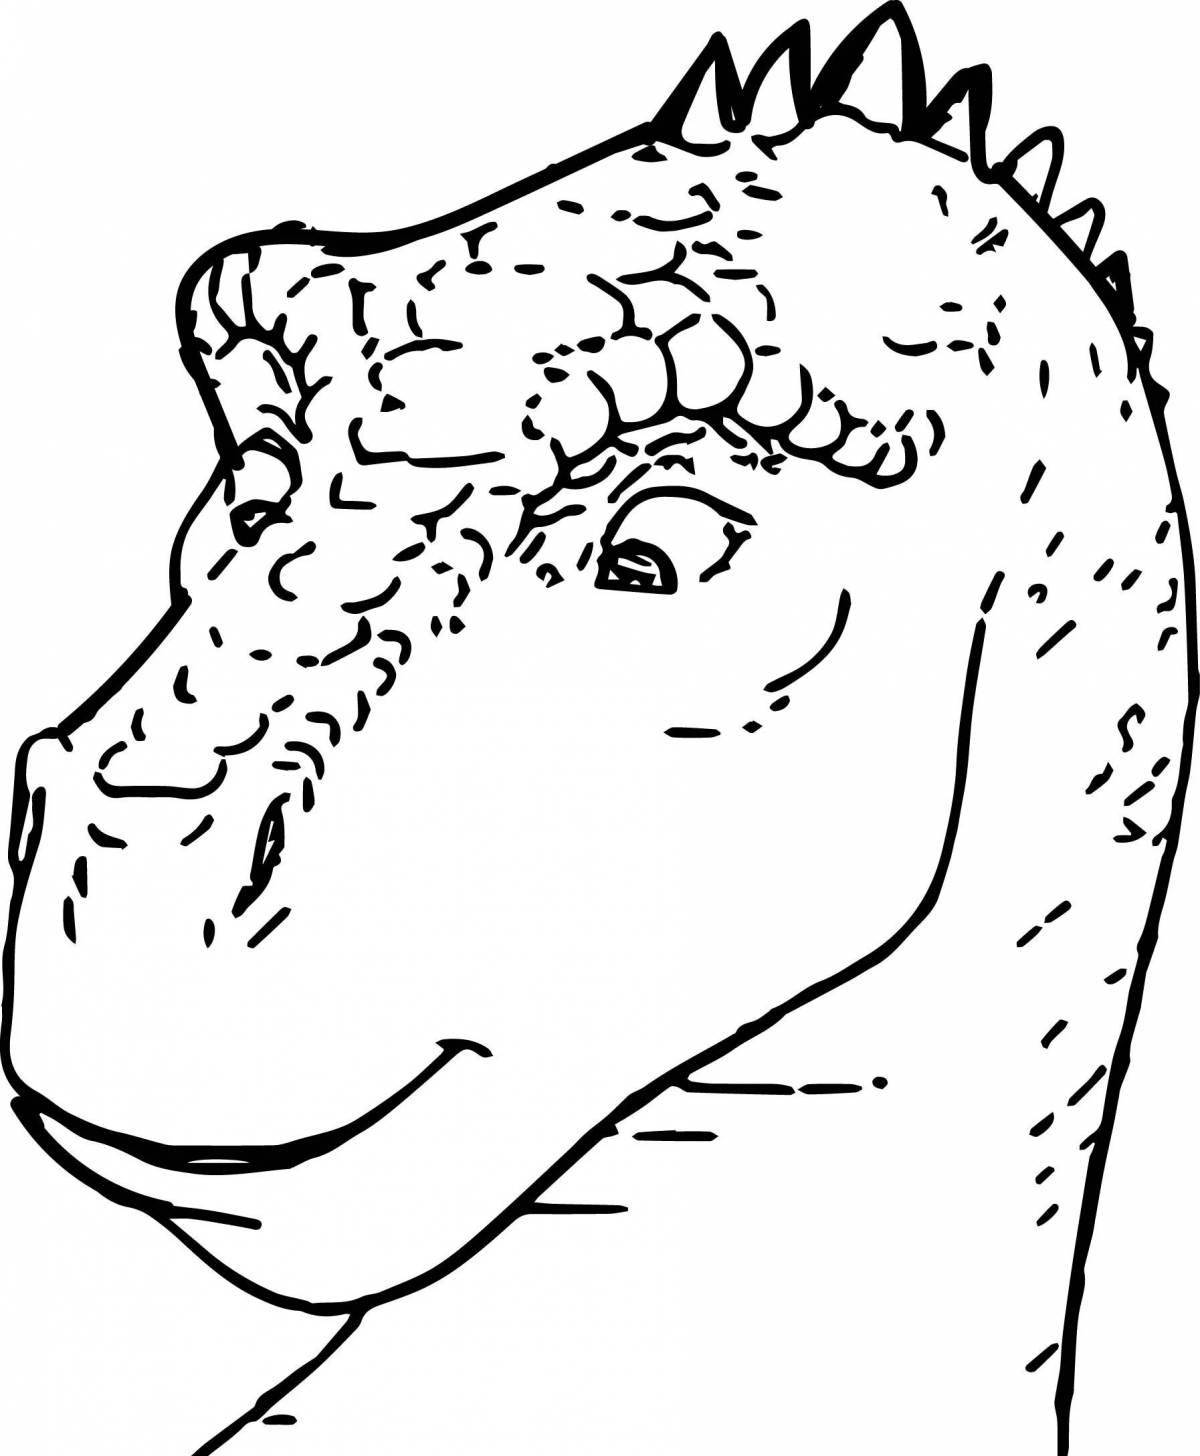 Exquisite lizard mask coloring page